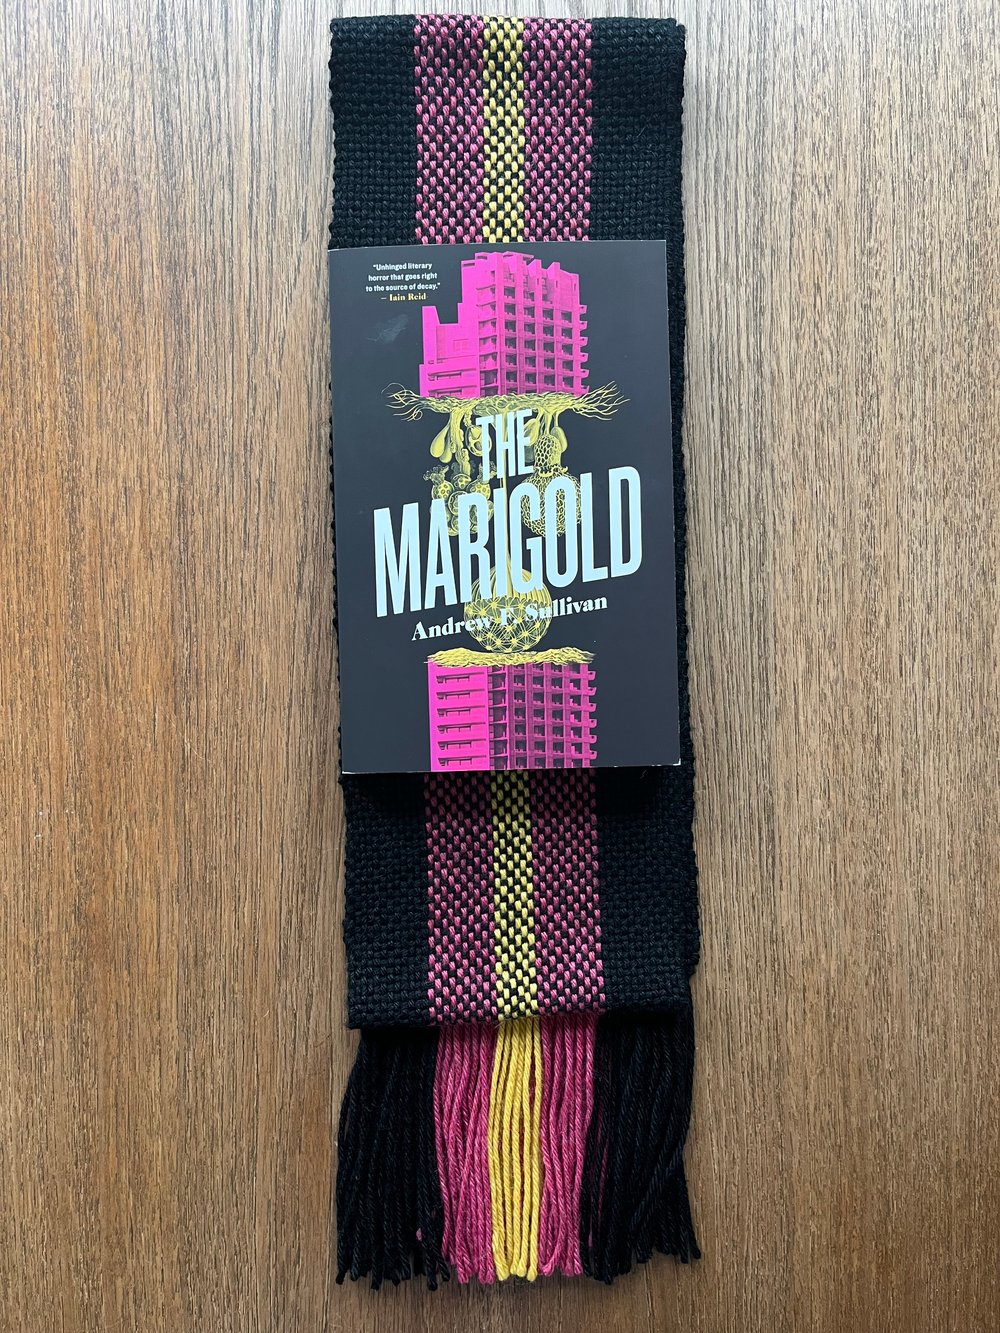 The Marigold scarf